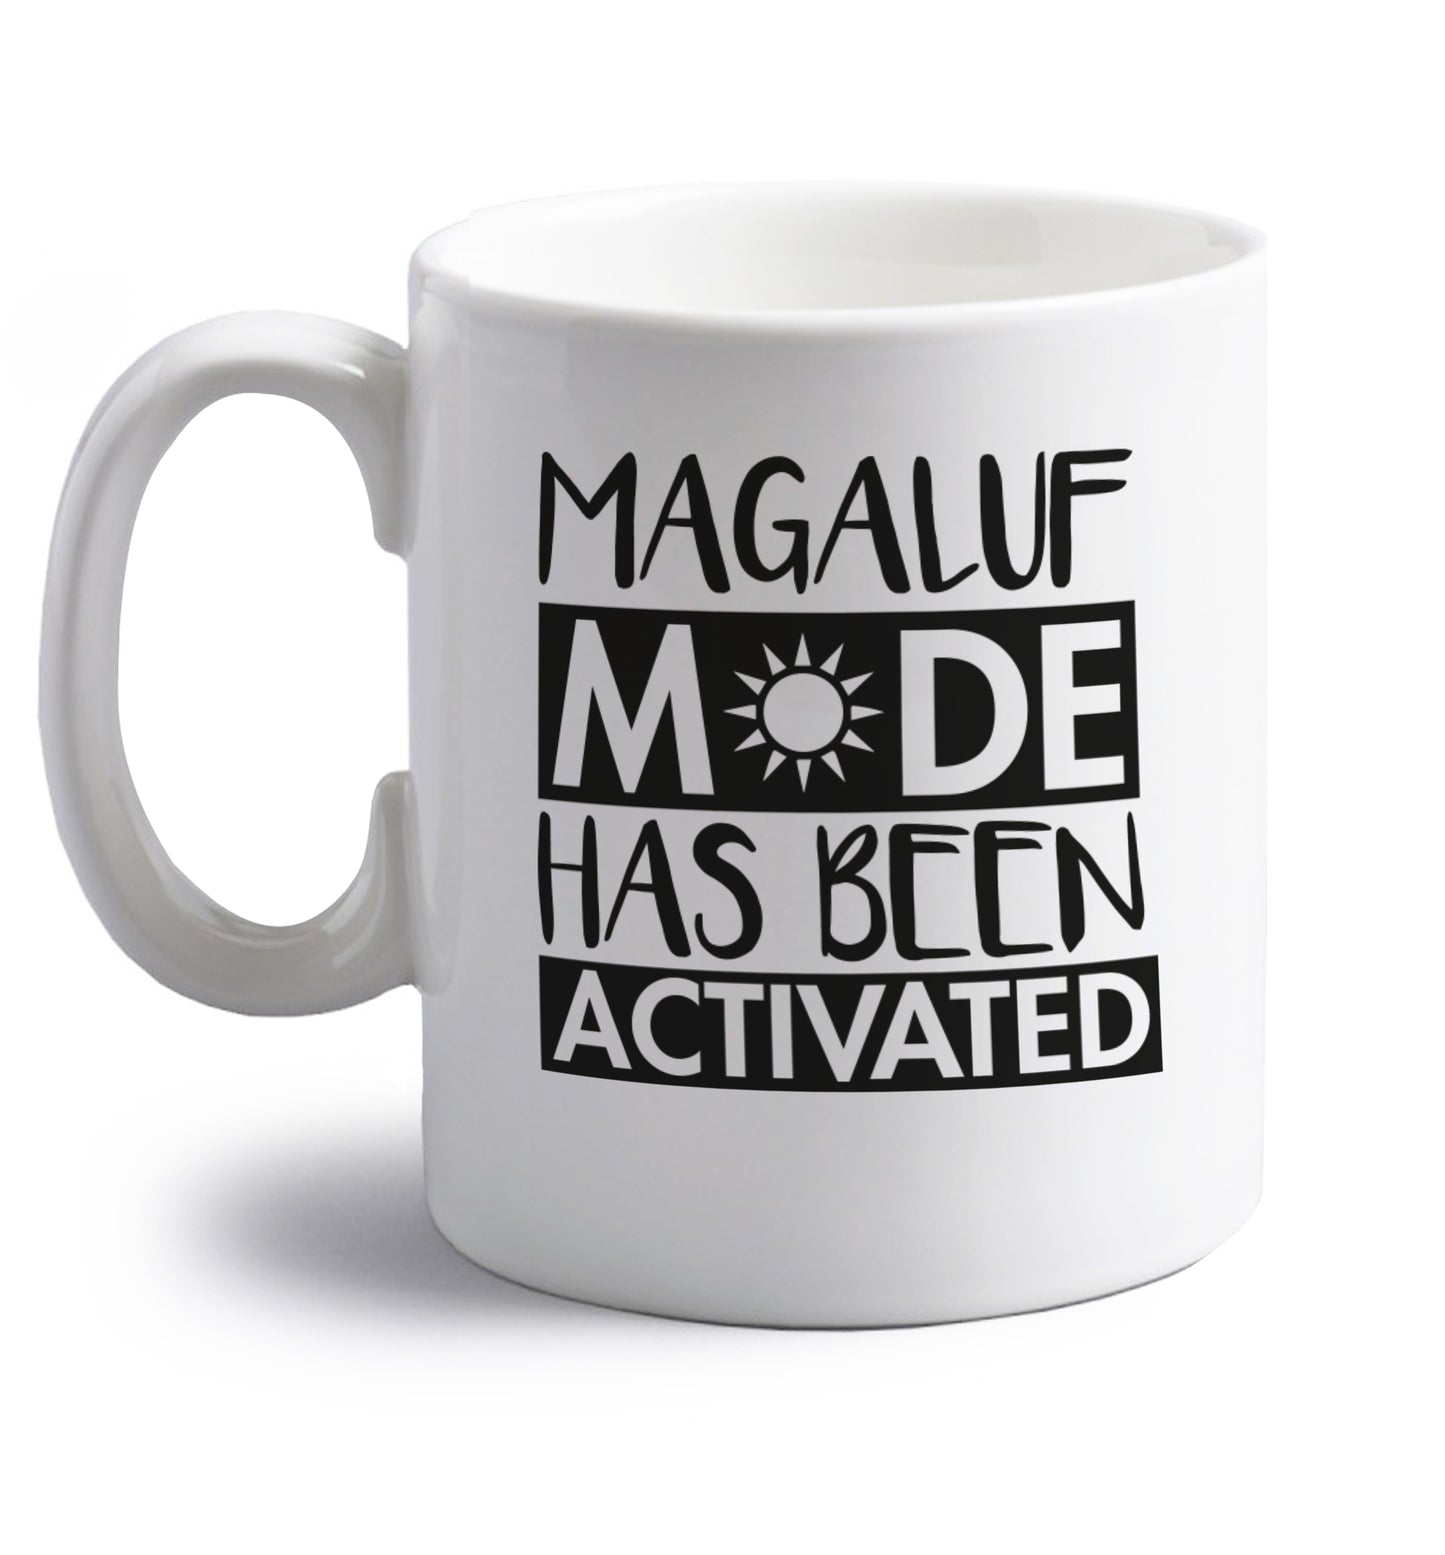 Magaluf mode has been activated right handed white ceramic mug 